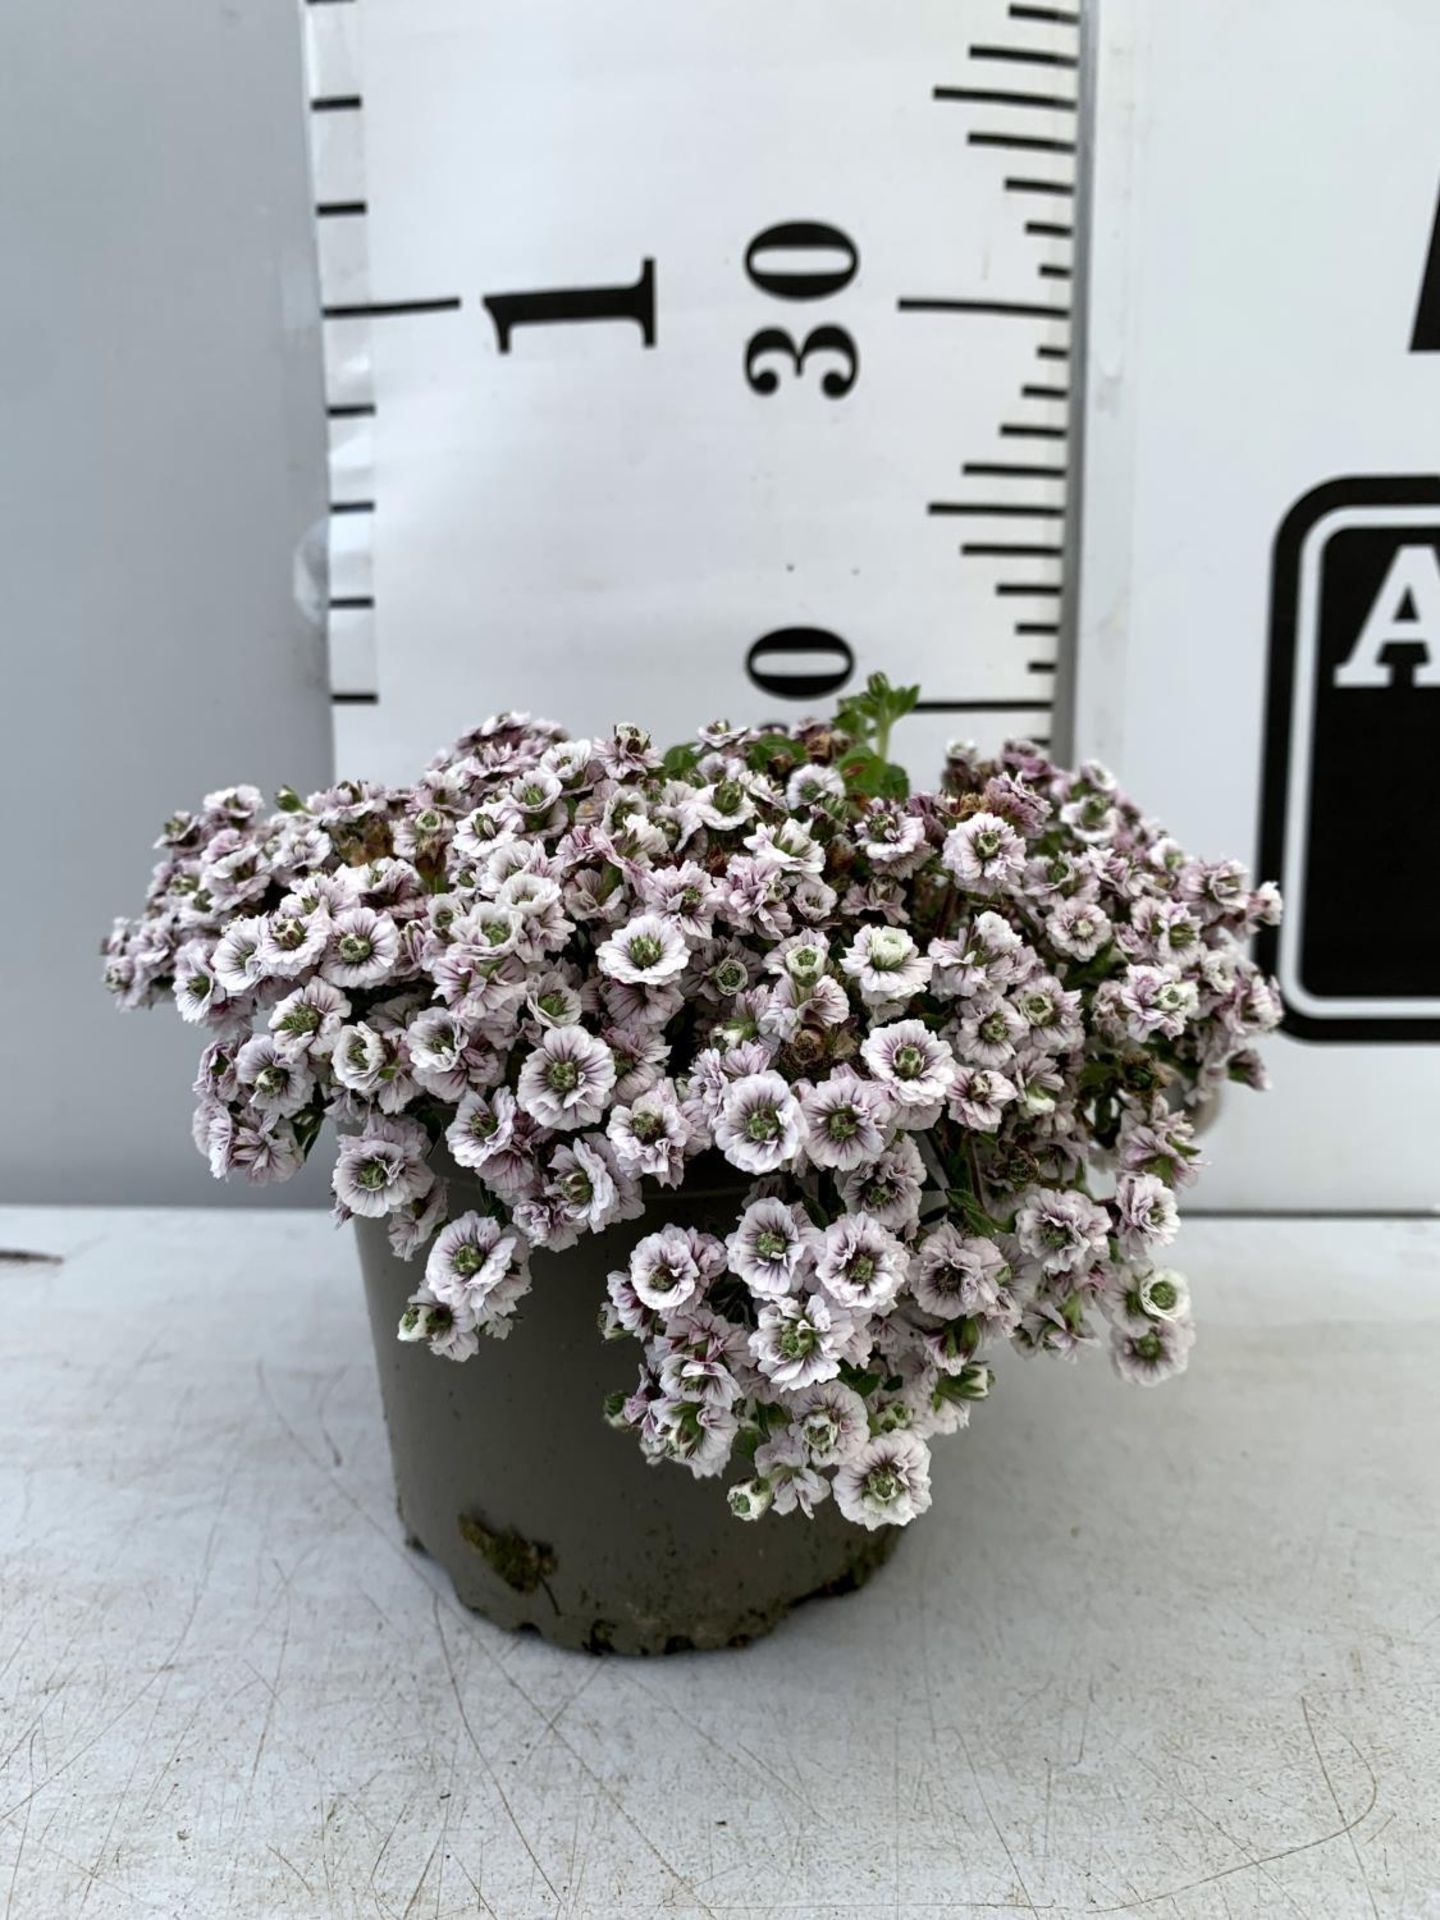 EIGHT GYPSOPHILA CERASTIOIDES PLENA WHITE IN 1 LTR POTS APPROX 20CM IN HEIGHT PLUS VAT TO BE SOLD - Image 8 of 8